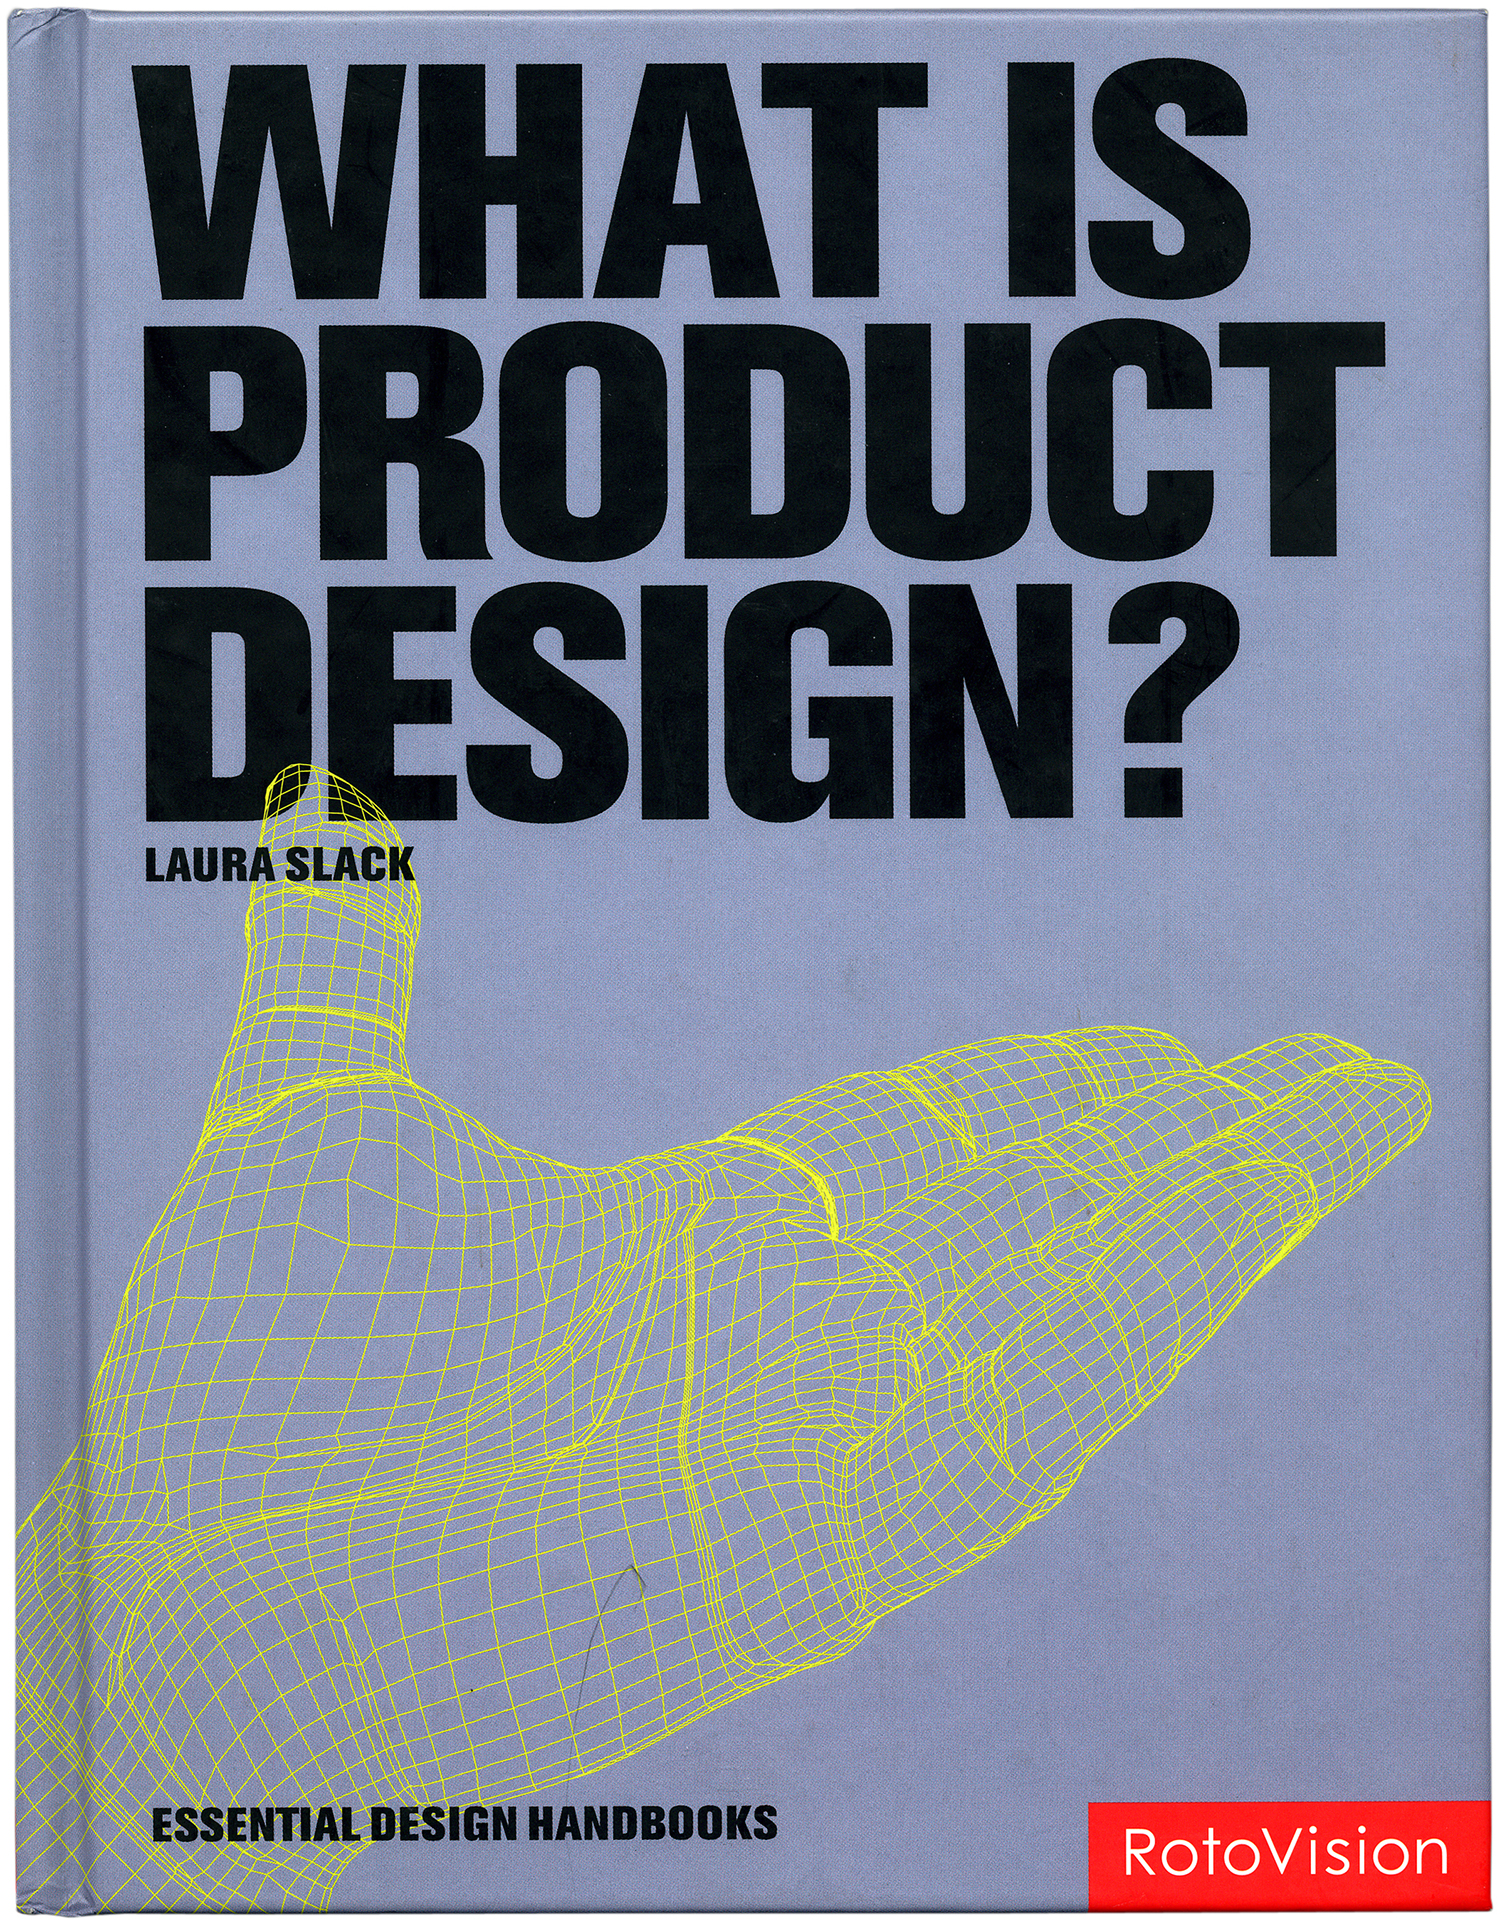 What is Product Design